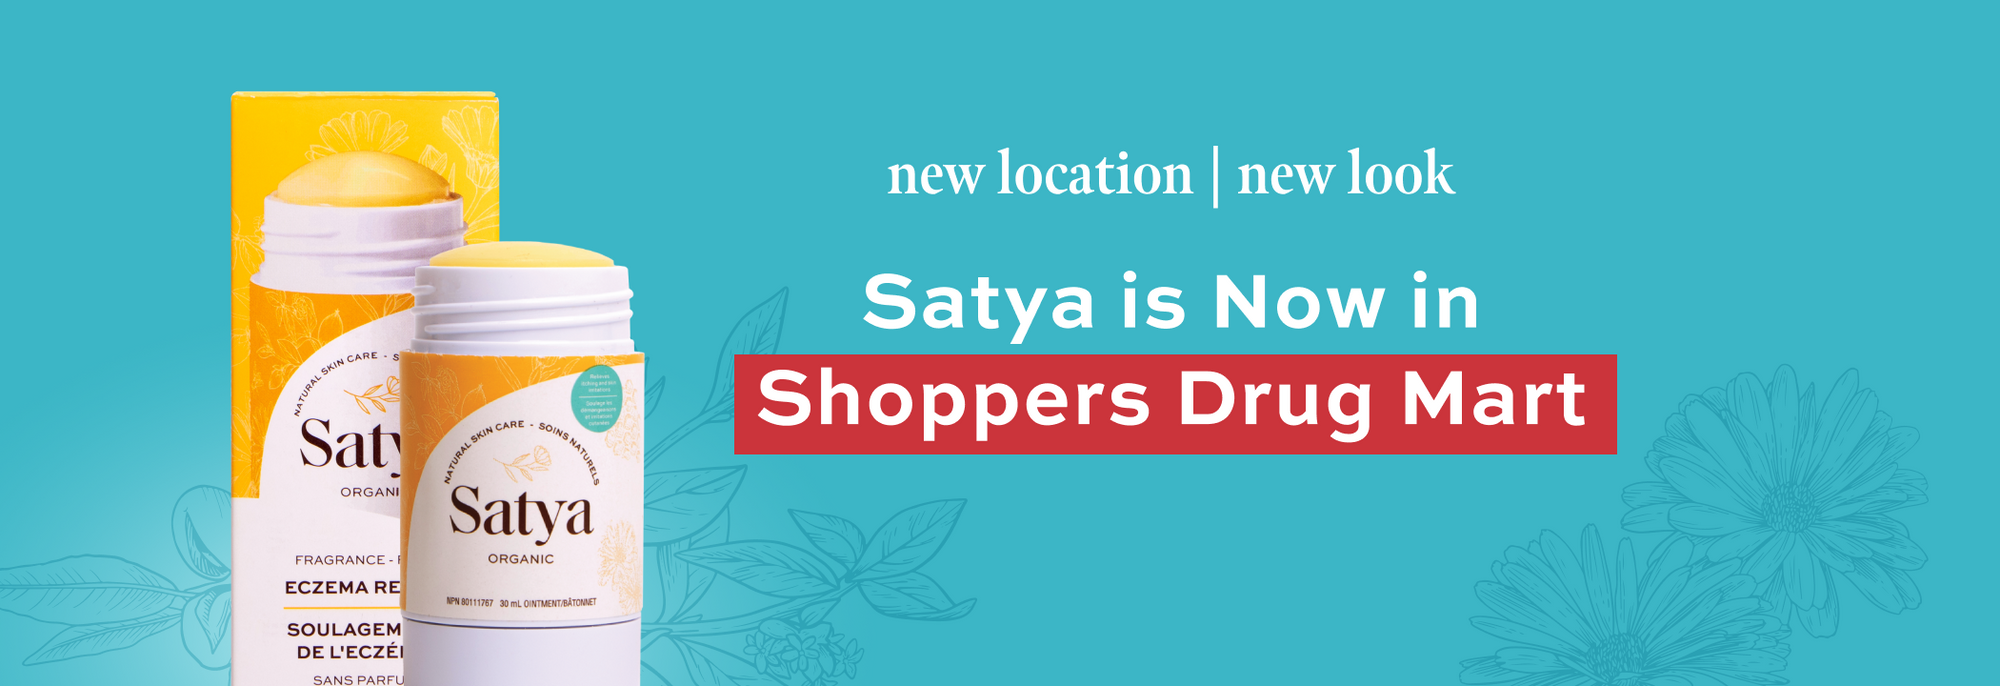 New location, new look. Satya is now in Shoppers Drug Mart.